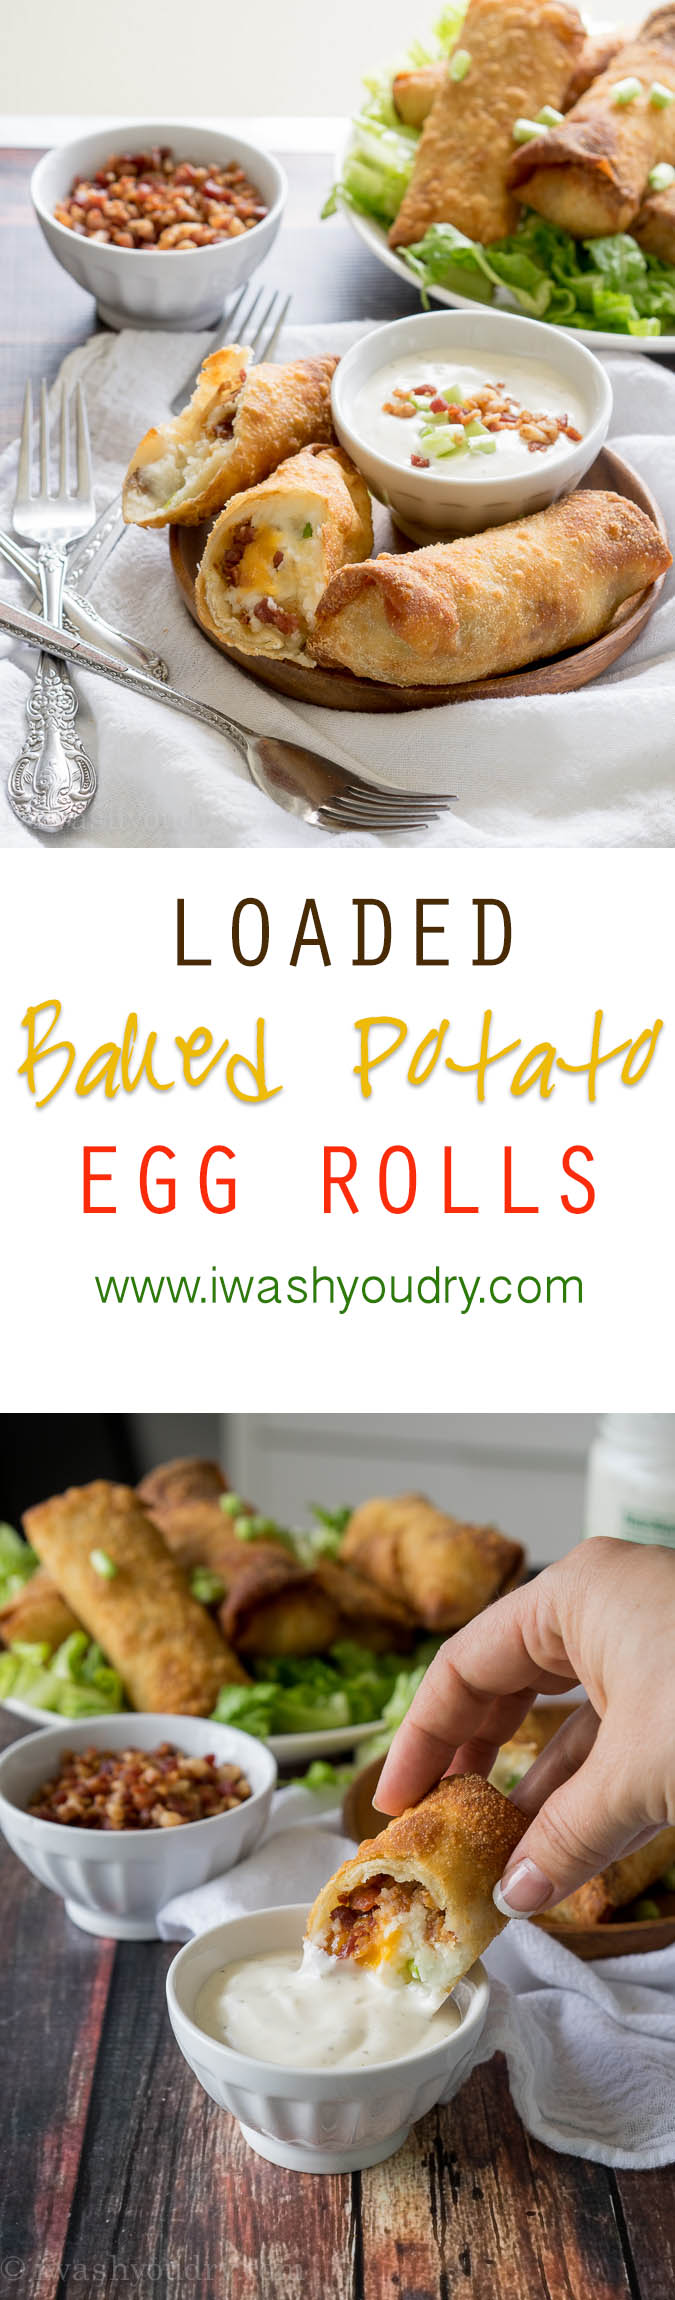 Fully Loaded Baked Potato Egg Rolls! Best idea ever, they taste like a giant french fry that's stuffed with flavorful potatoes, cheese and bacon!!